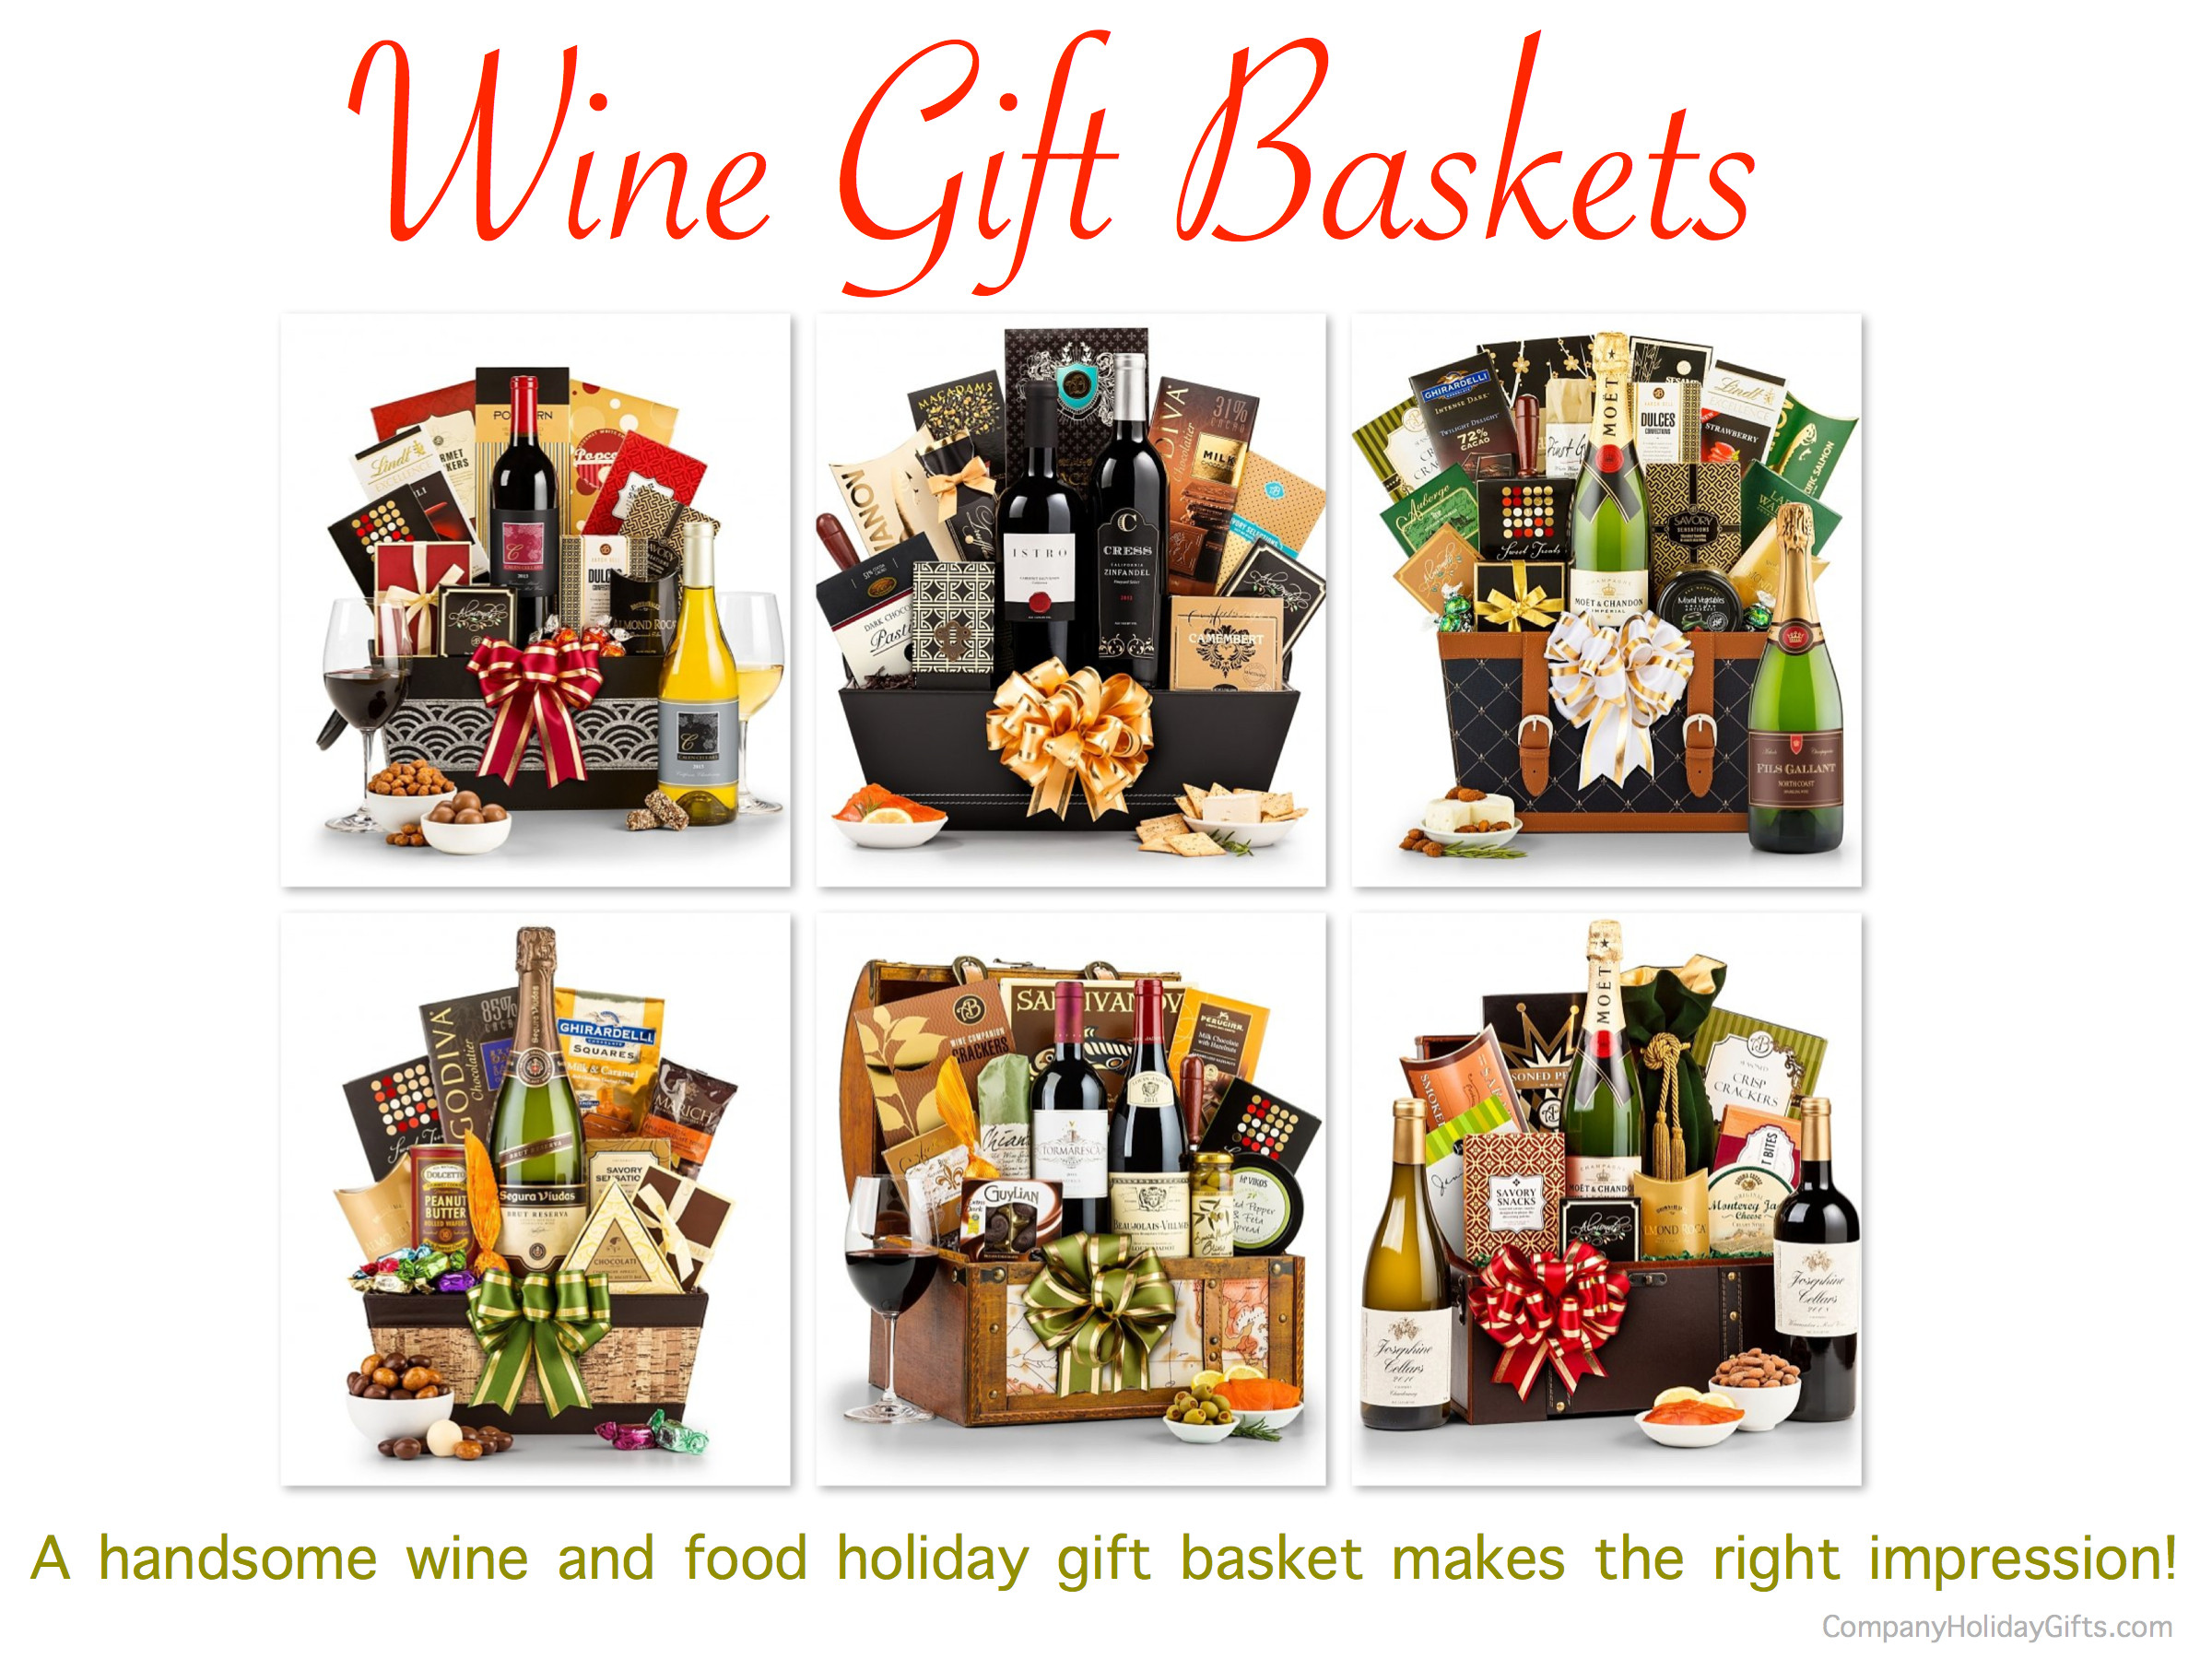 Business Holiday Gift Ideas
 Best Holiday Gifts for Business Associates & Clients